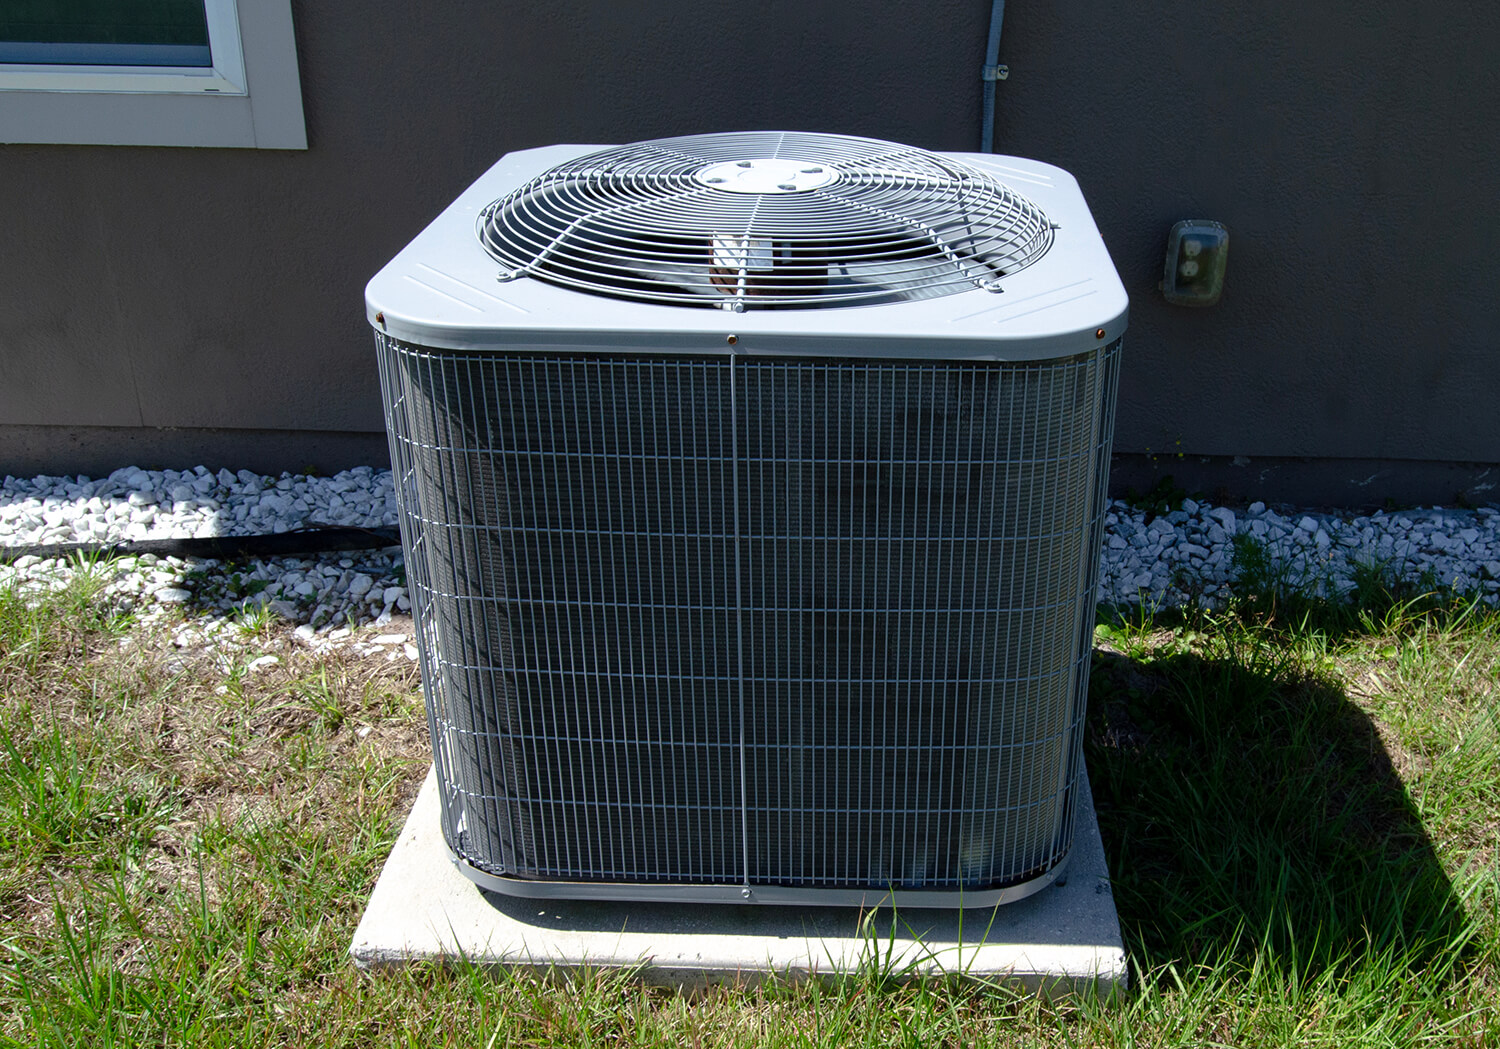 Heating and Cooling the Home With a Good Heating as well as Air Conditioning System is Critical